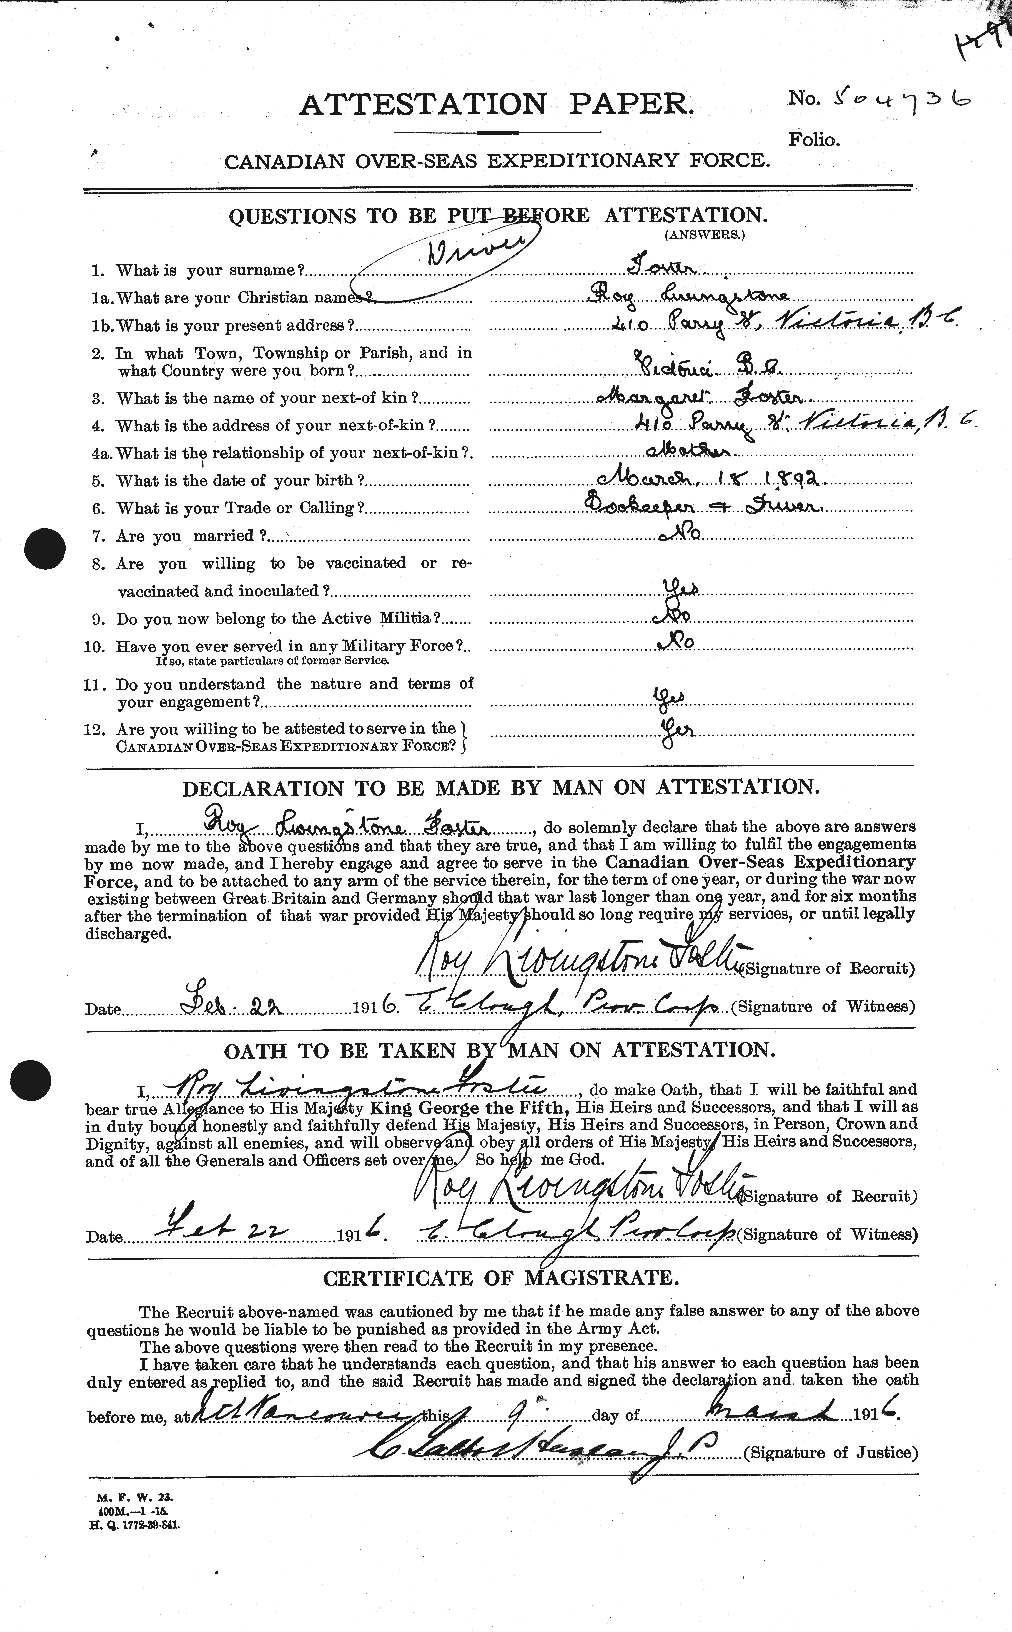 Personnel Records of the First World War - CEF 335196a